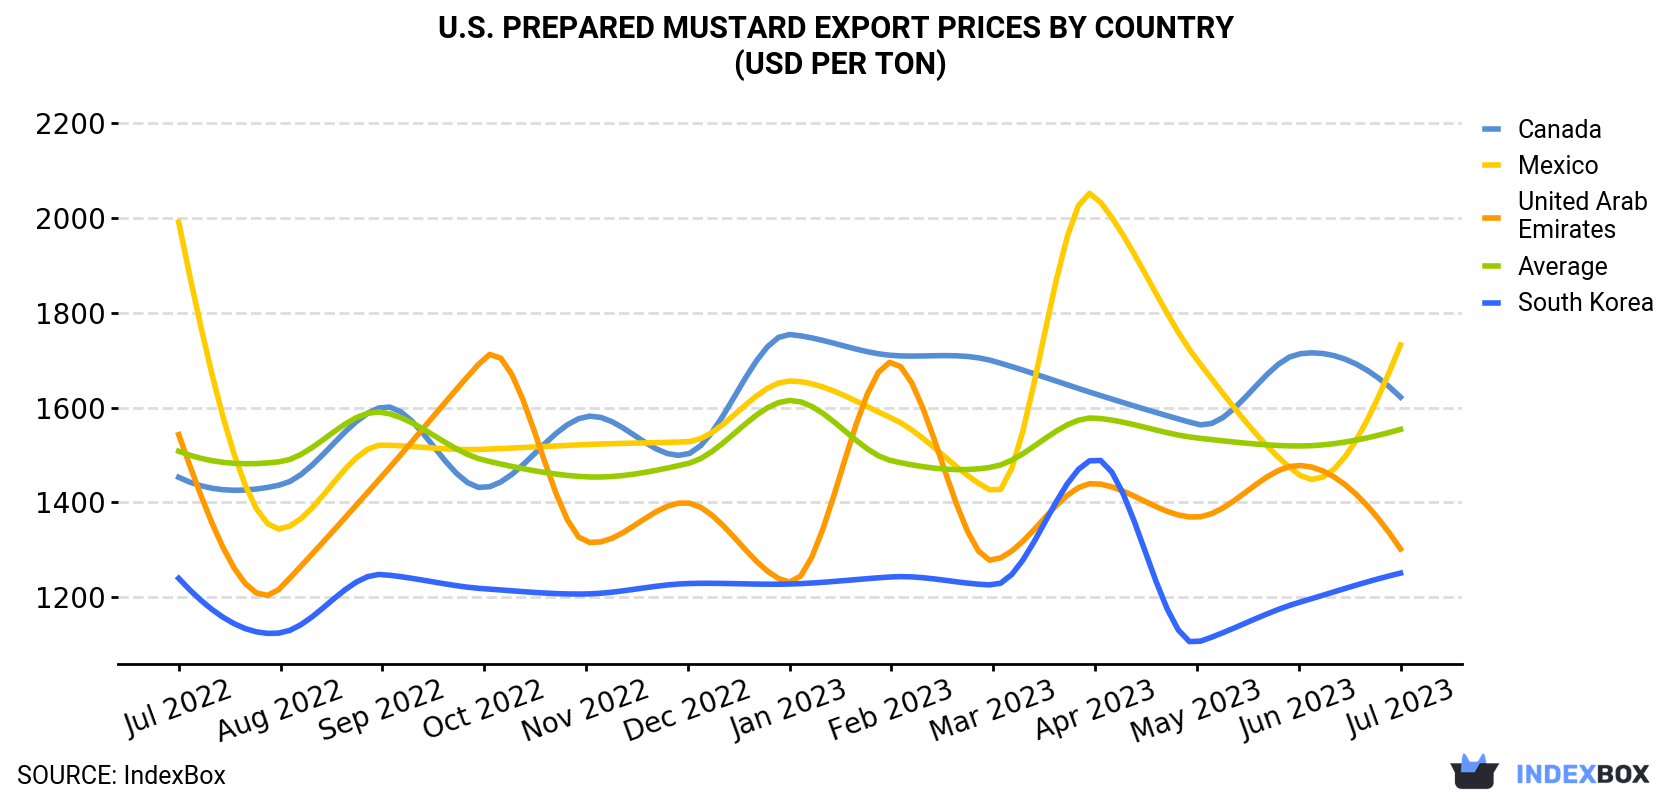 U.S. Prepared Mustard Export Prices By Country (USD Per Ton)